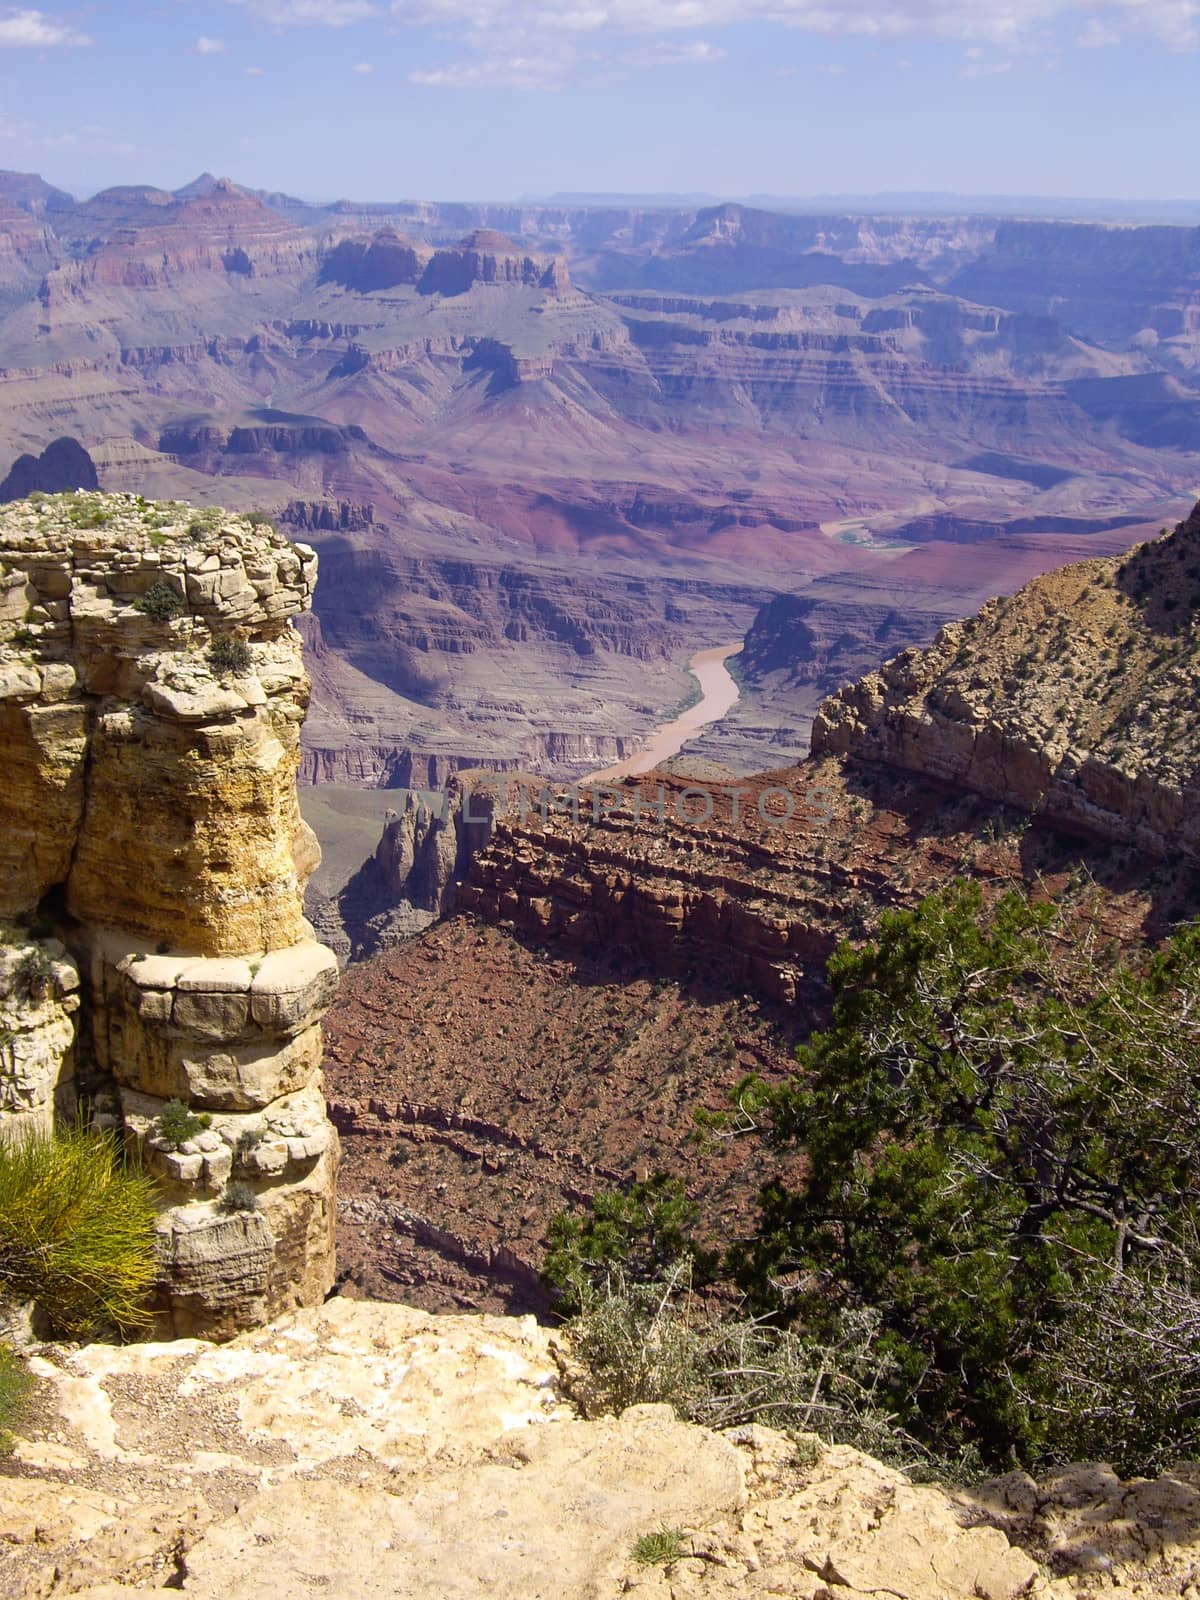 View over the edge of Colorado River at Grand Canyon National Park